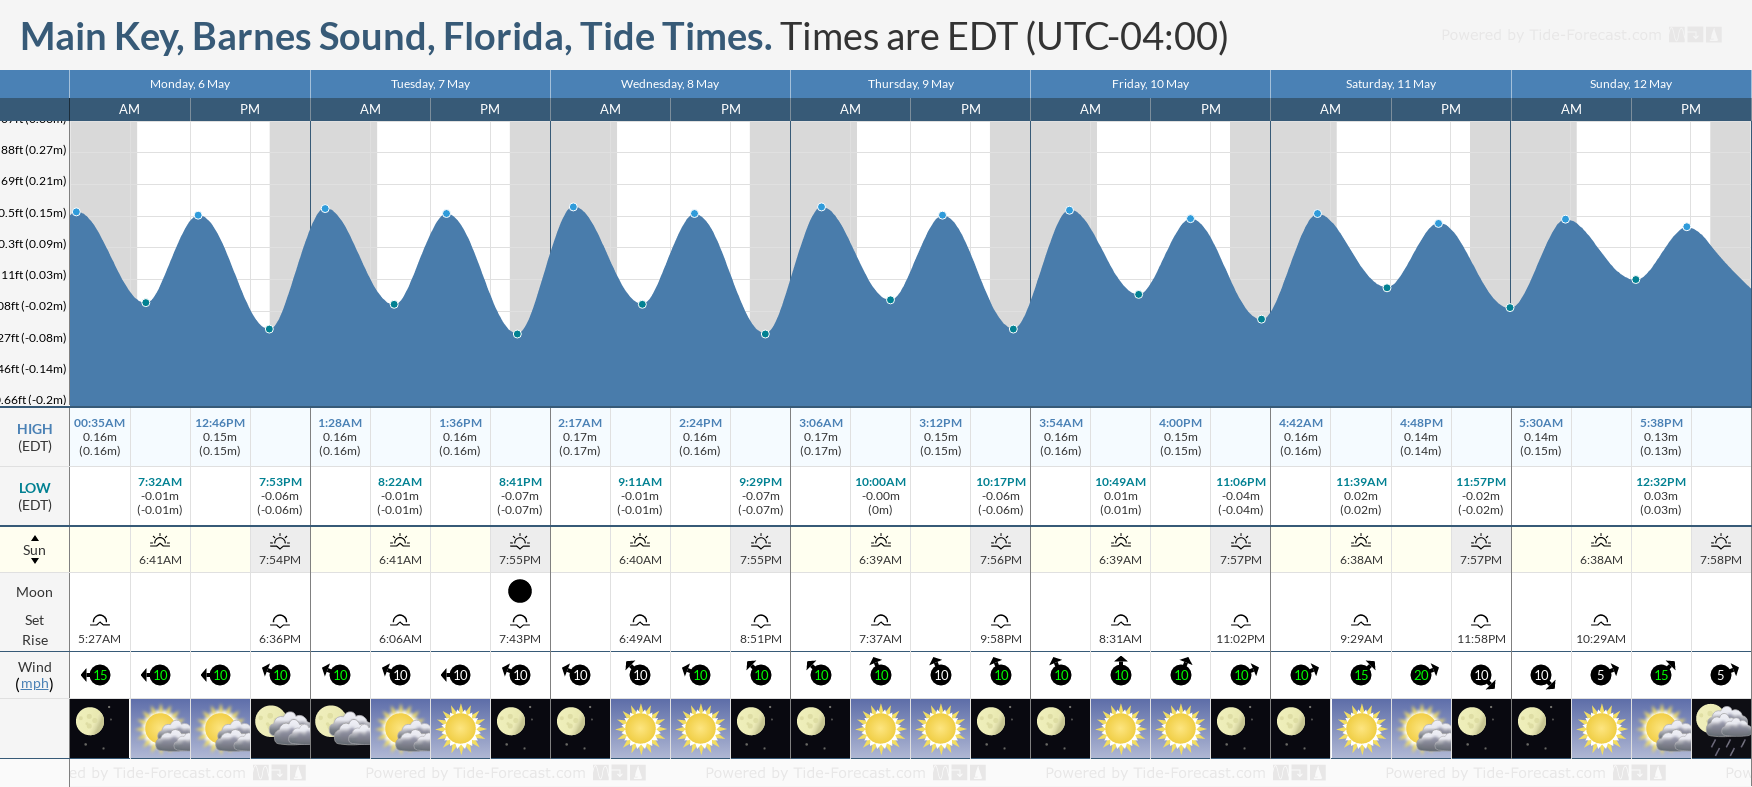 Main Key, Barnes Sound, Florida Tide Chart including high and low tide tide times for the next 7 days